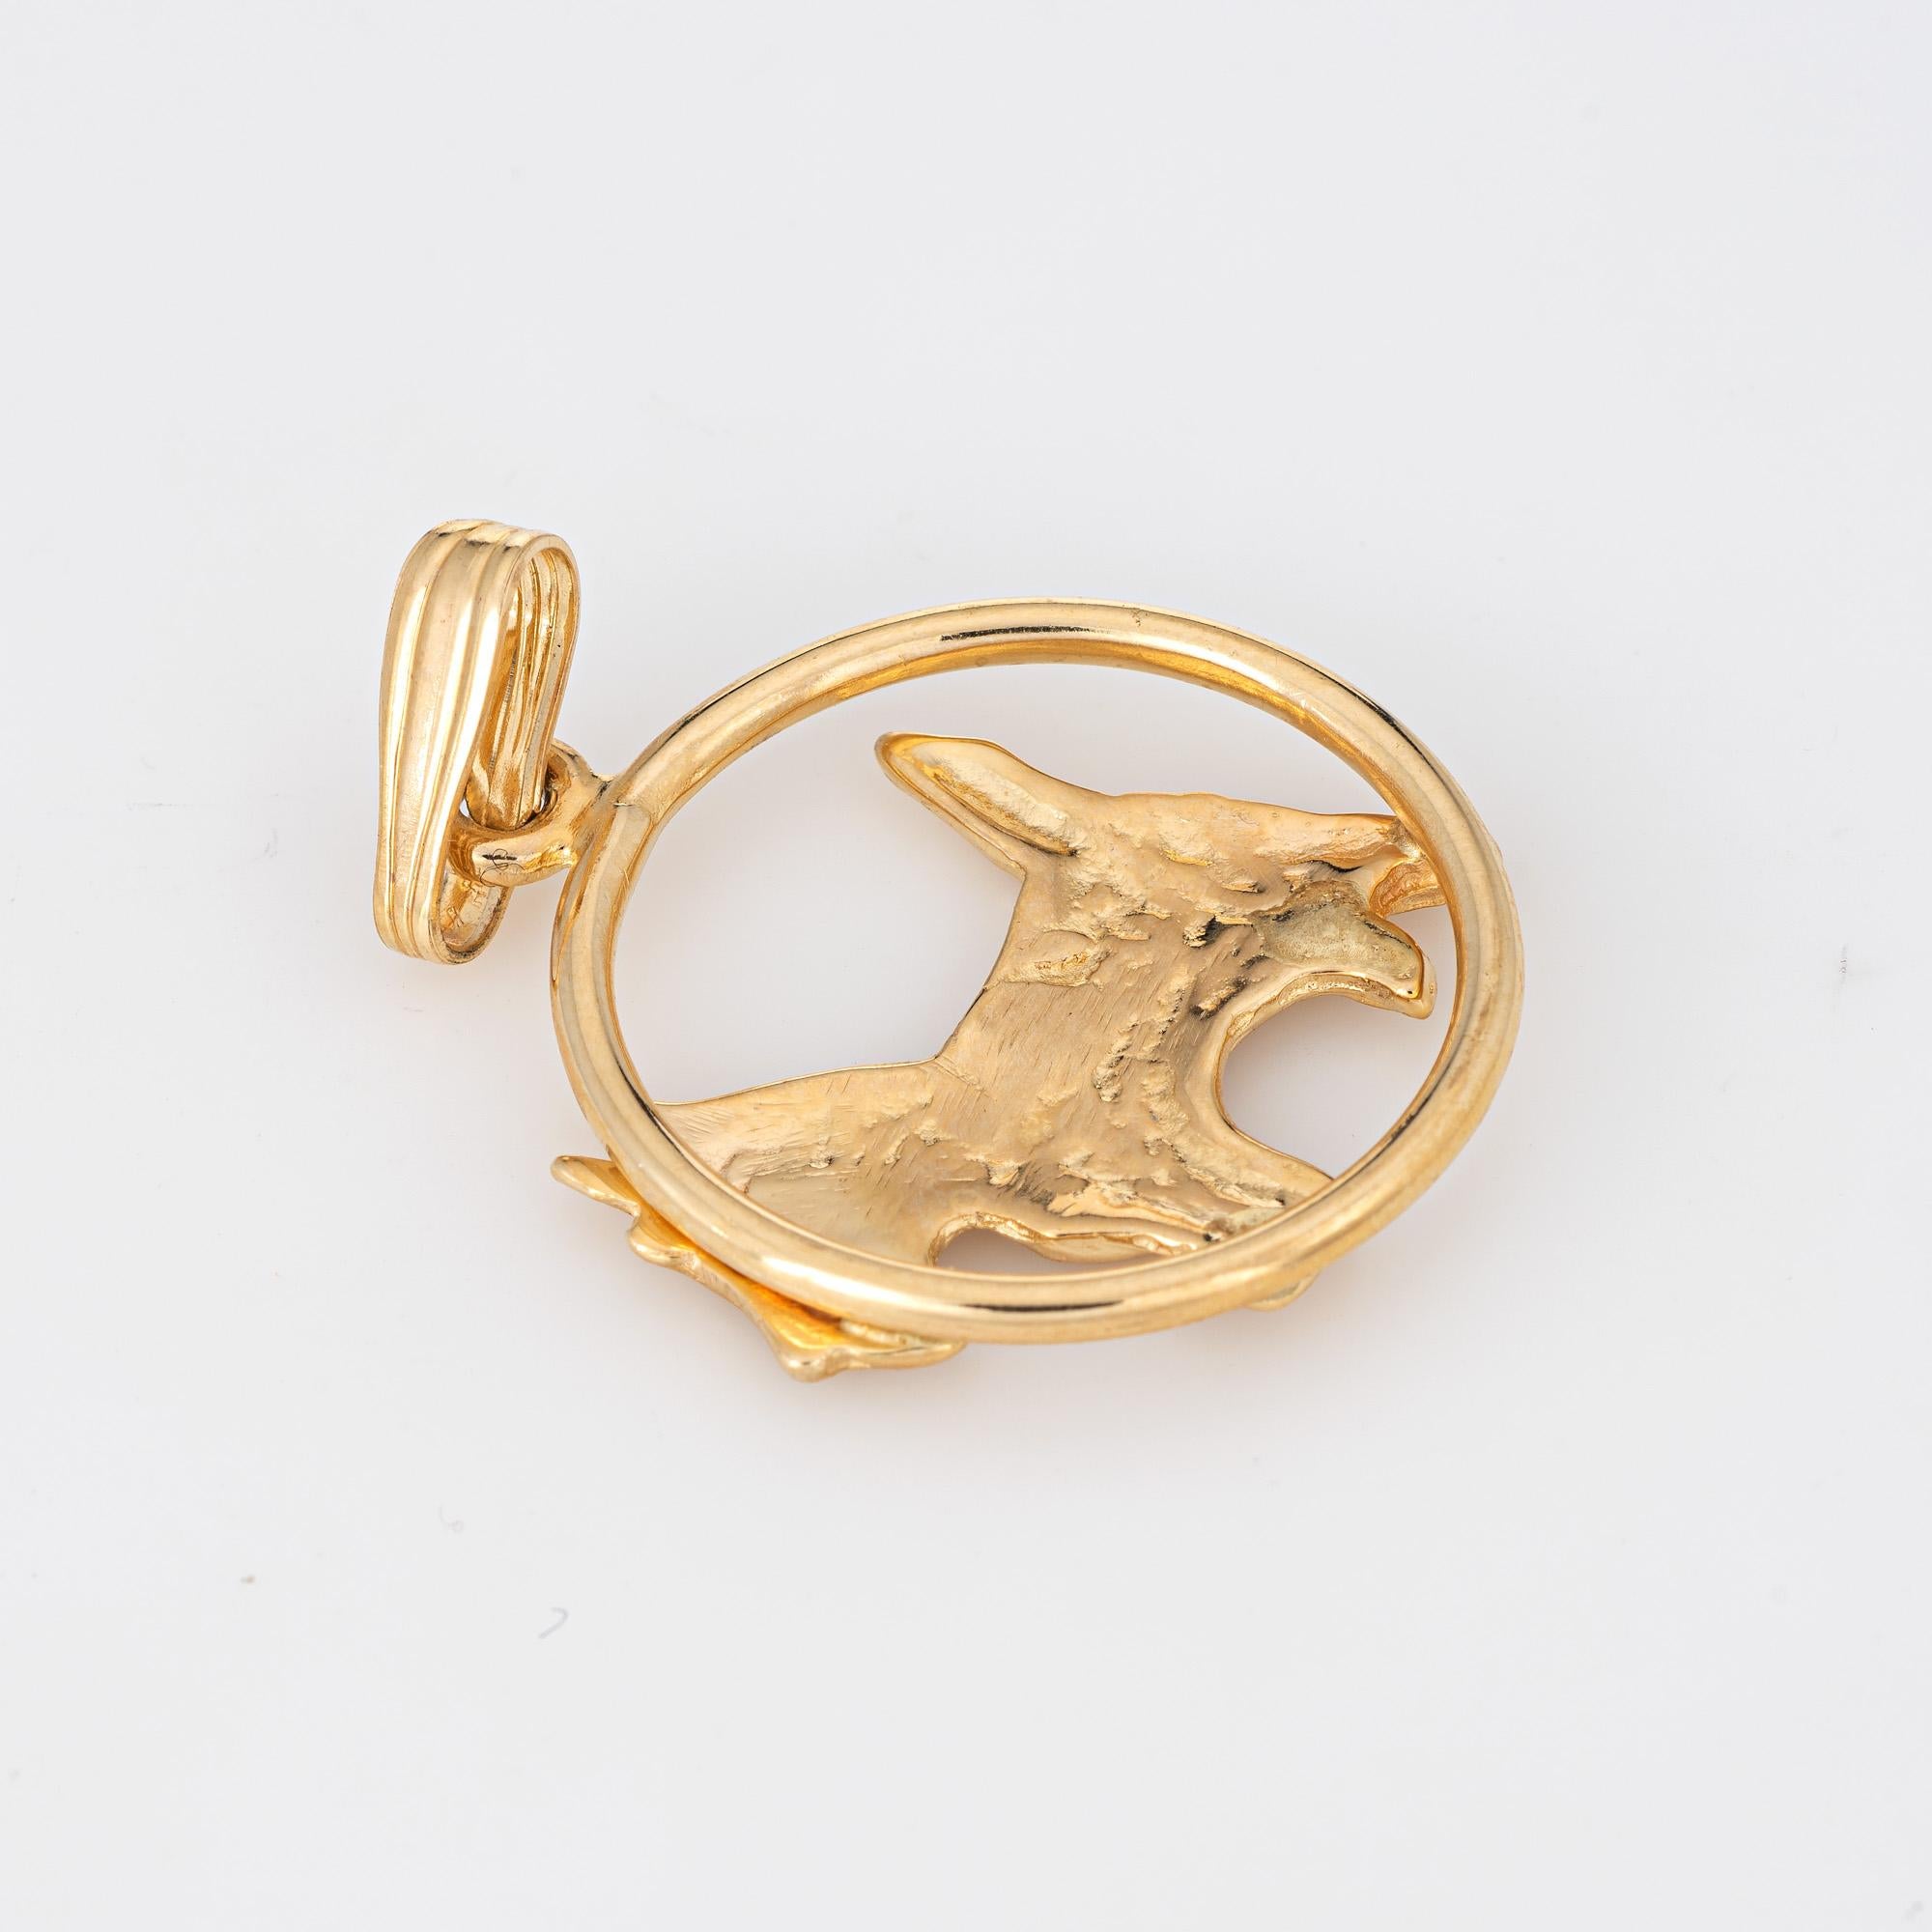 Finely detailed vintage Scottish Terrier dog charm crafted in 14k yellow gold.  

The sweet charm features a charming scottie terrier set within a circular mount. The piece can be worn as a charm on a bracelet or as a pendant.

The charm is in very